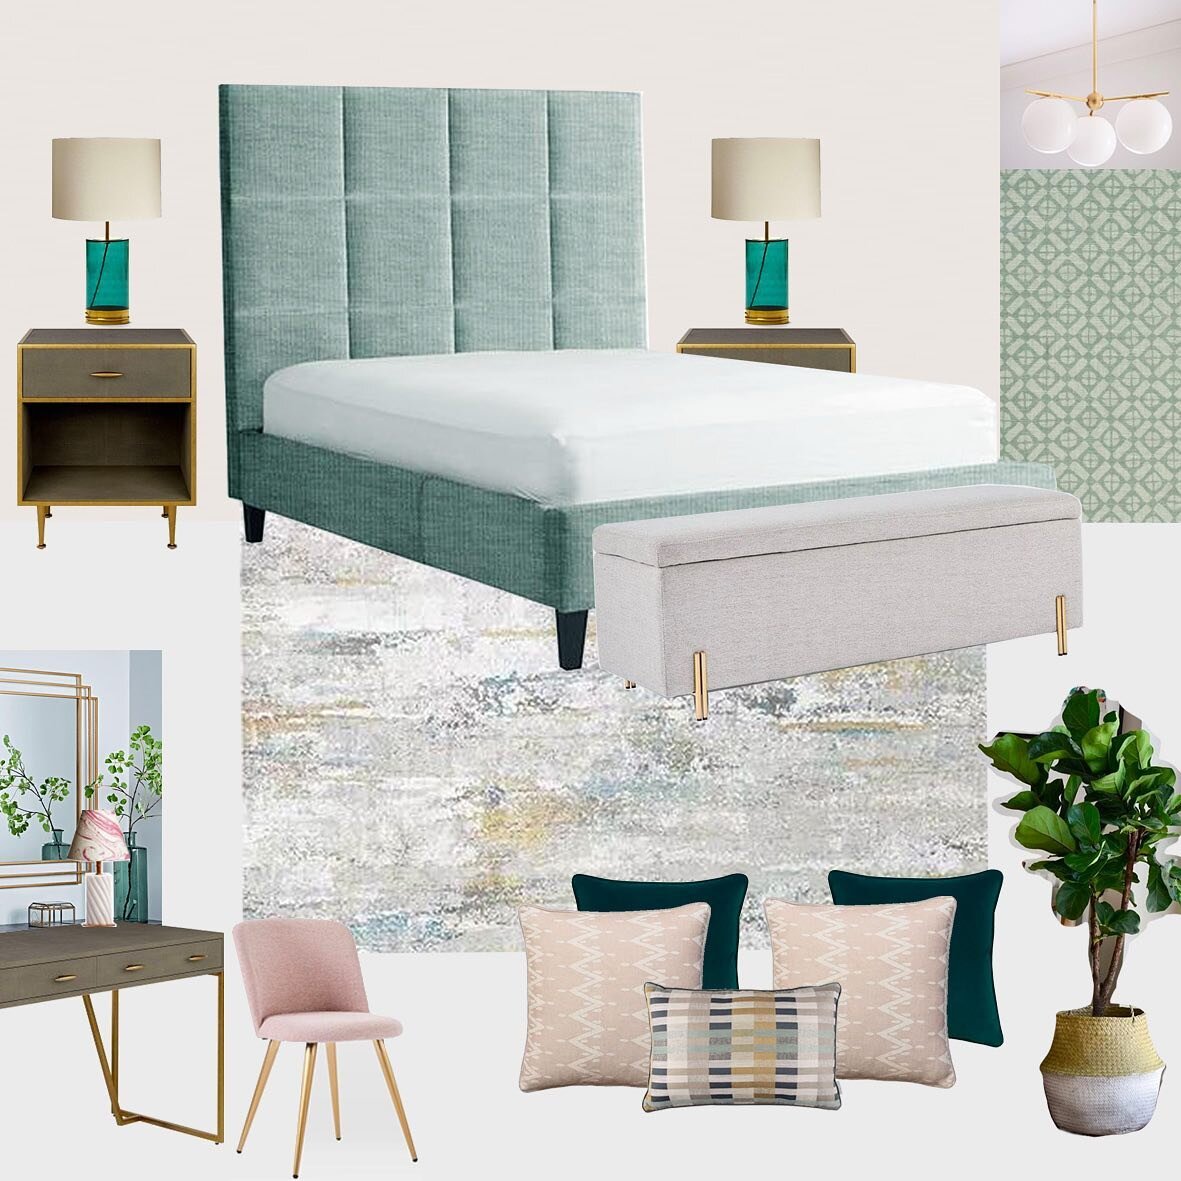 I absolutely love a calm and serene bedroom scheme, creating a space you can relax and escape to. Soft calm tones with layers of texture and pattern.

A master bedroom design for my lovely clients new build, just a few more details to finalise and it